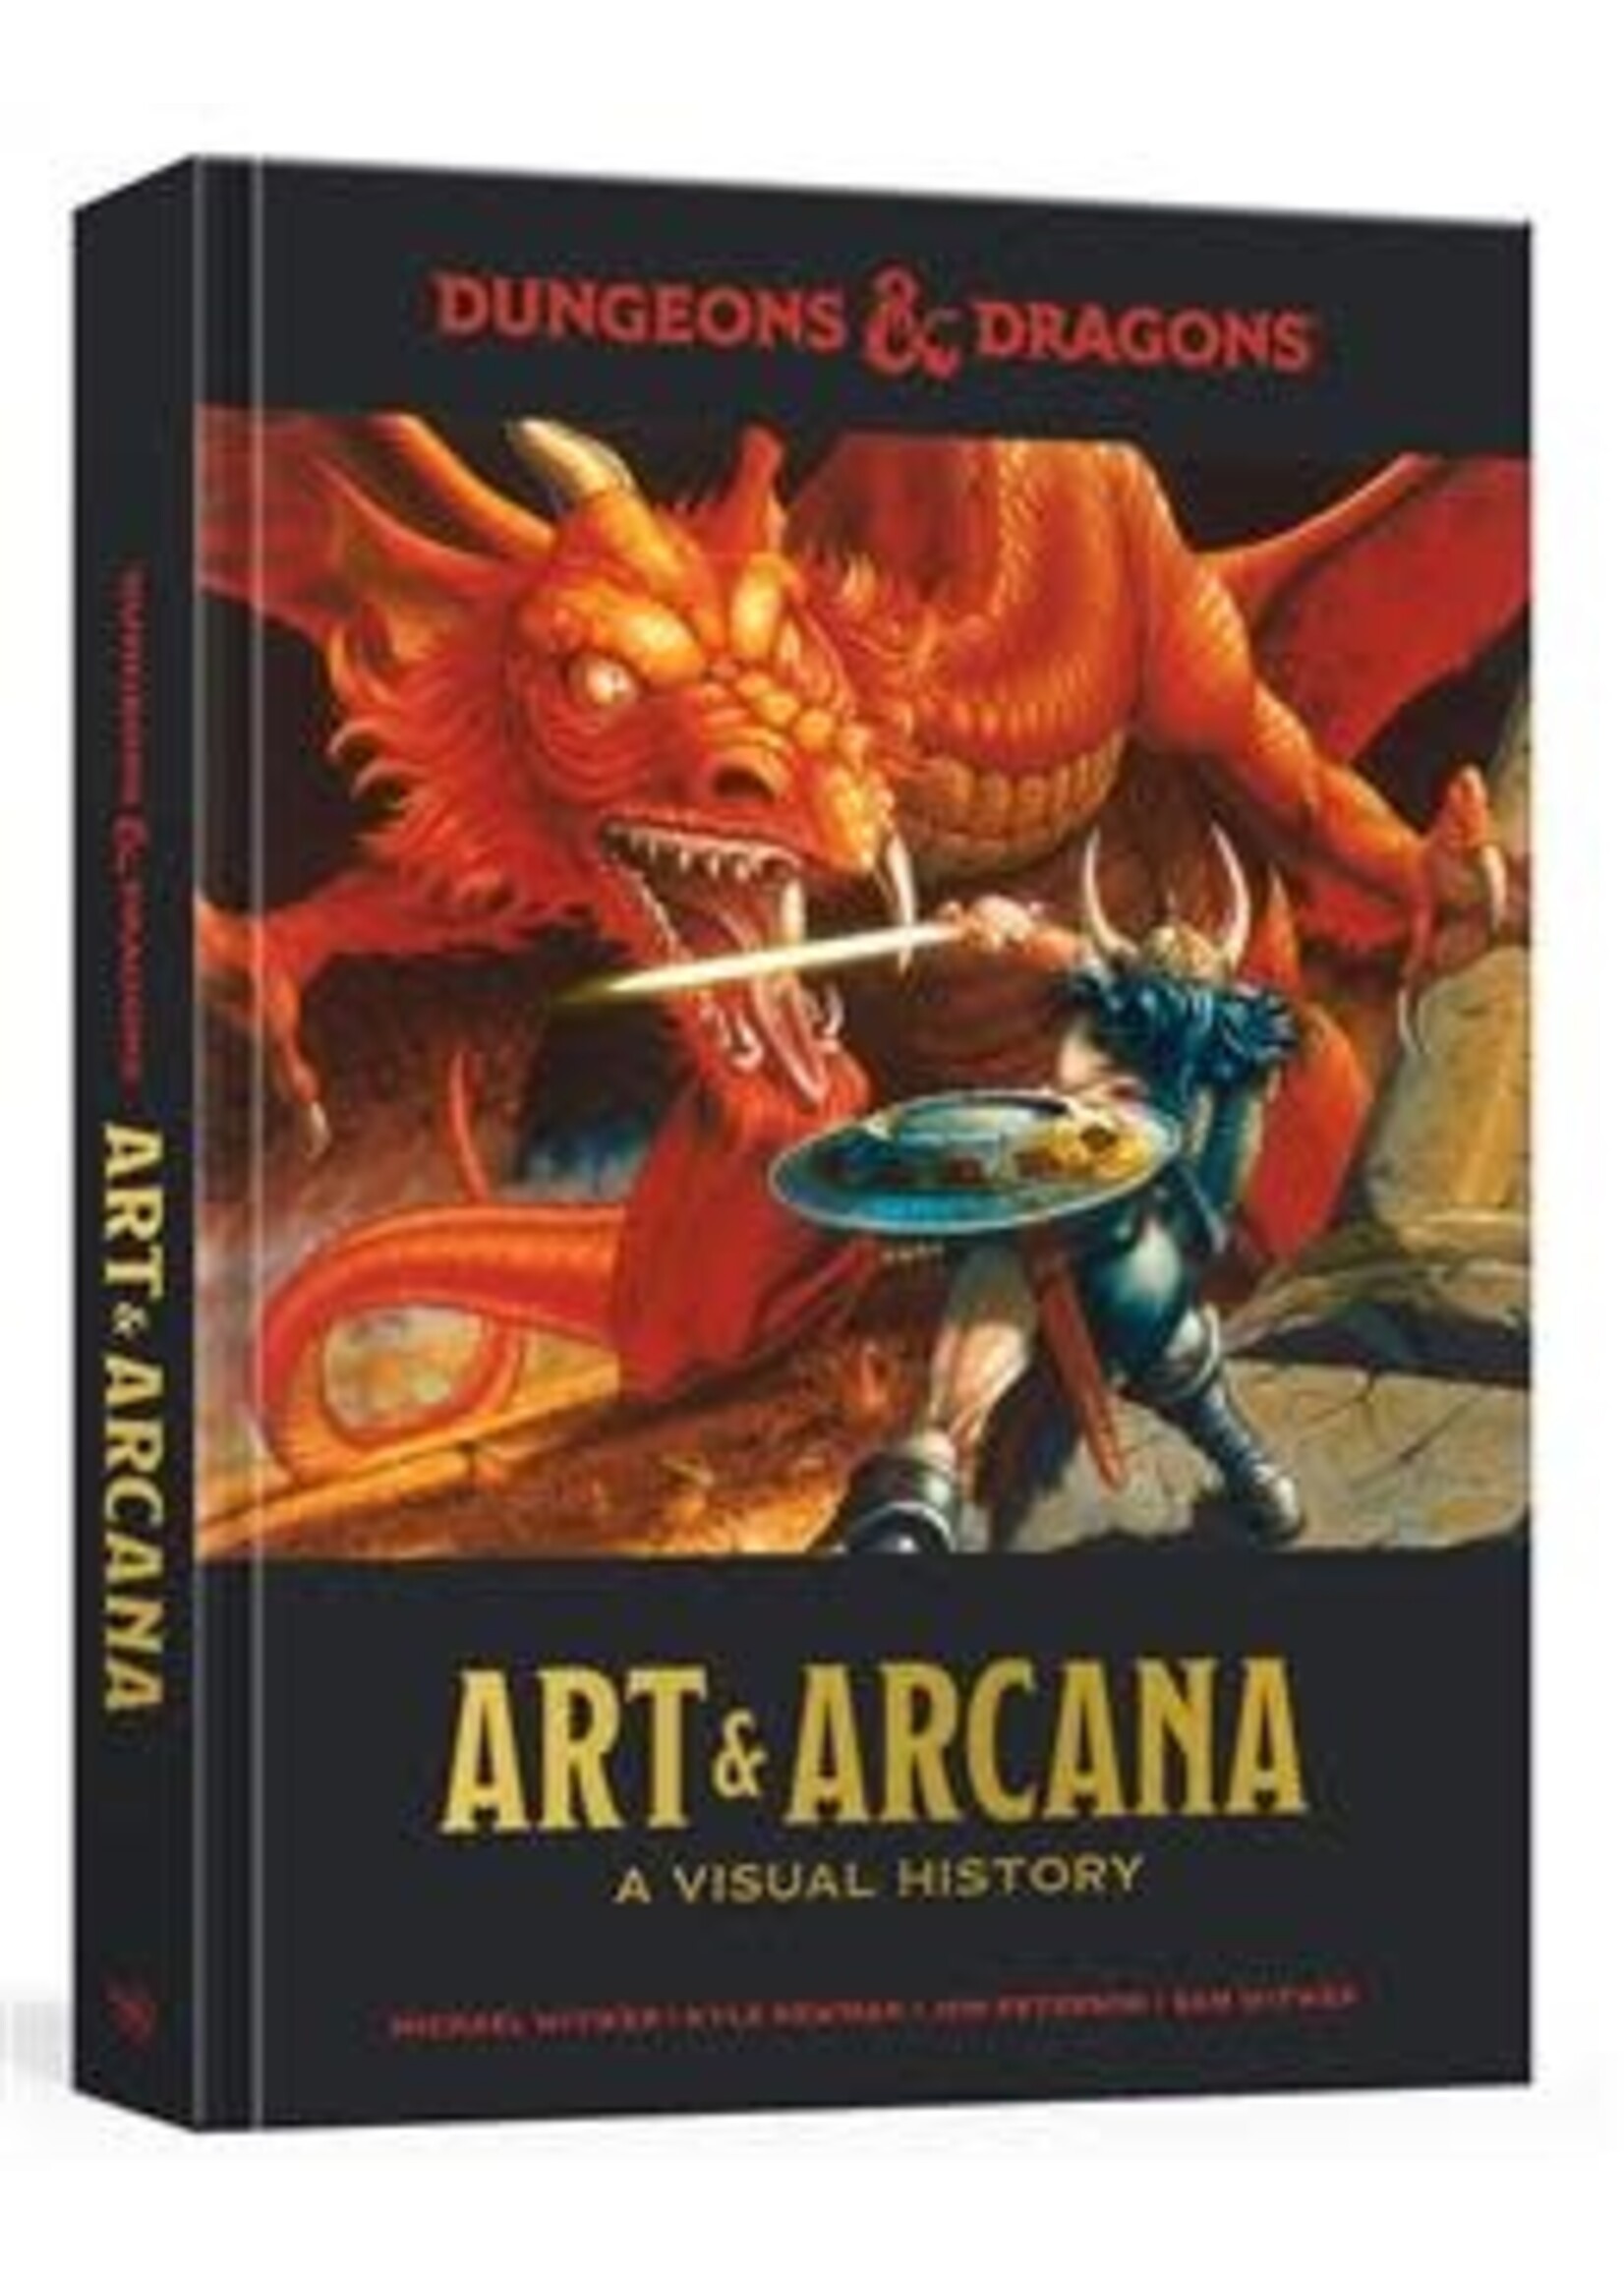 Dungeons & Dragons - Art & Arcana: A Visual History by Michael Witwer, Kyle Newman, Jon Peterson, Sam Witwer